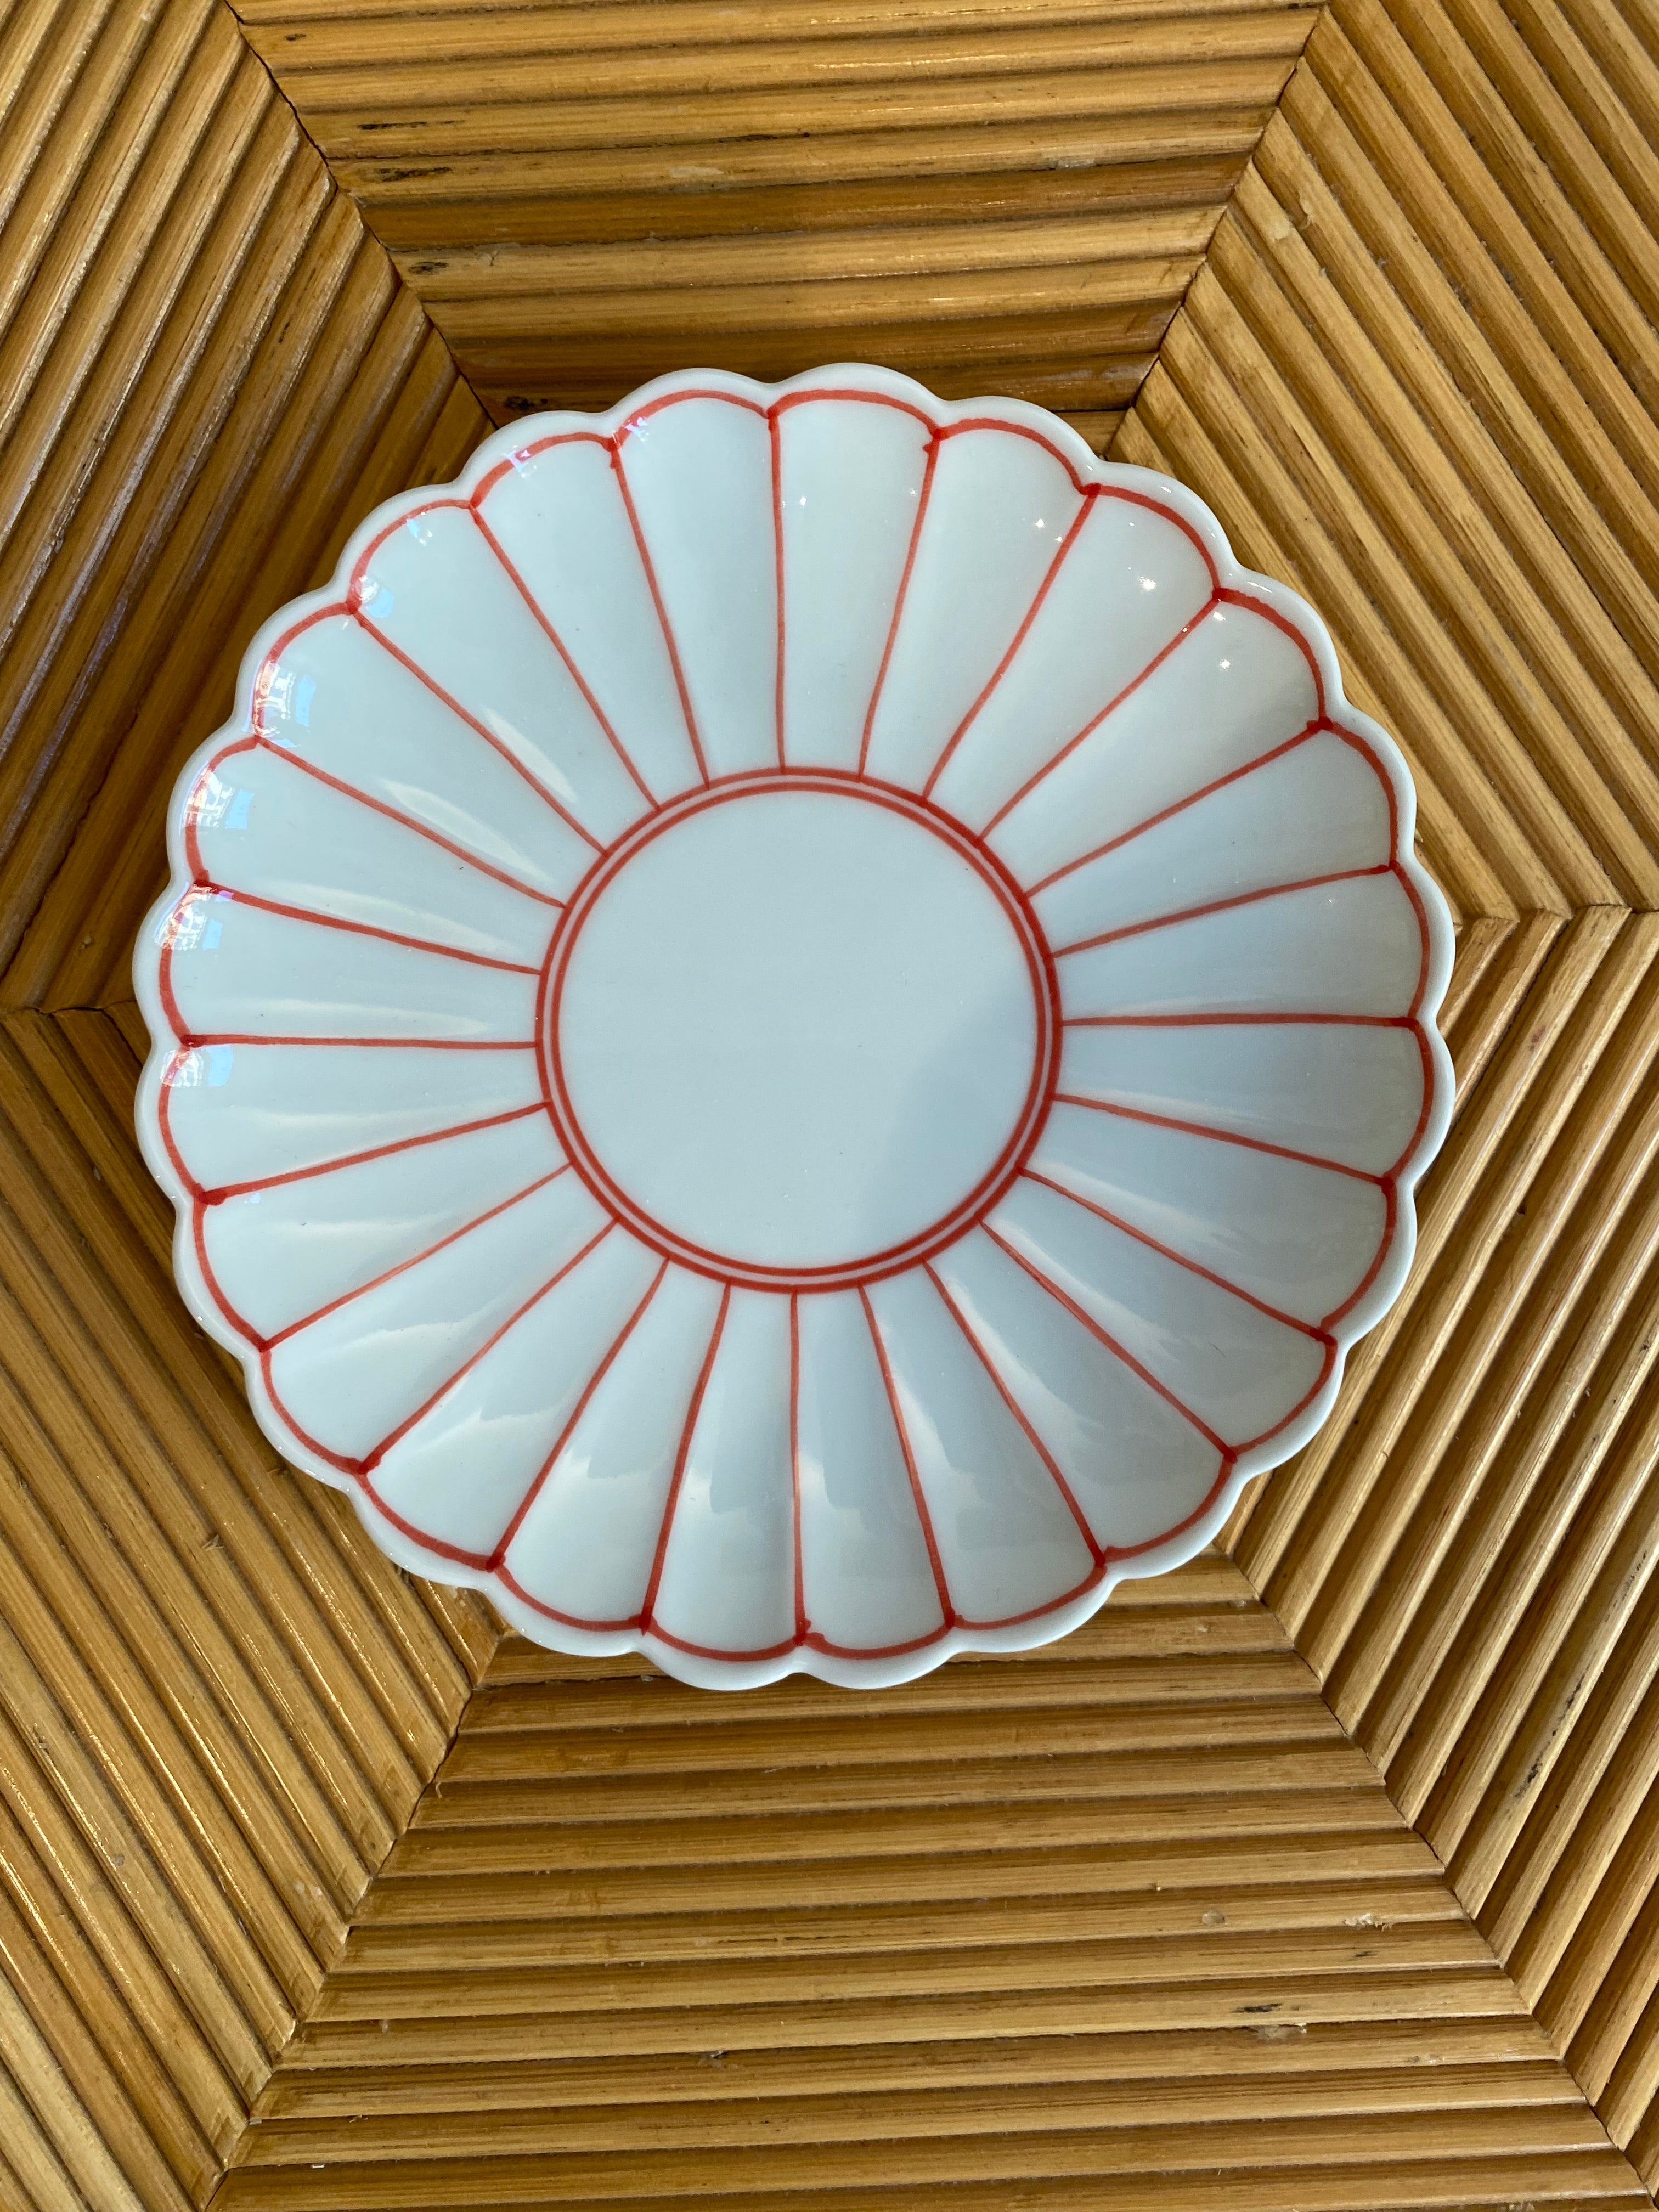 Japanese flower plate with red details